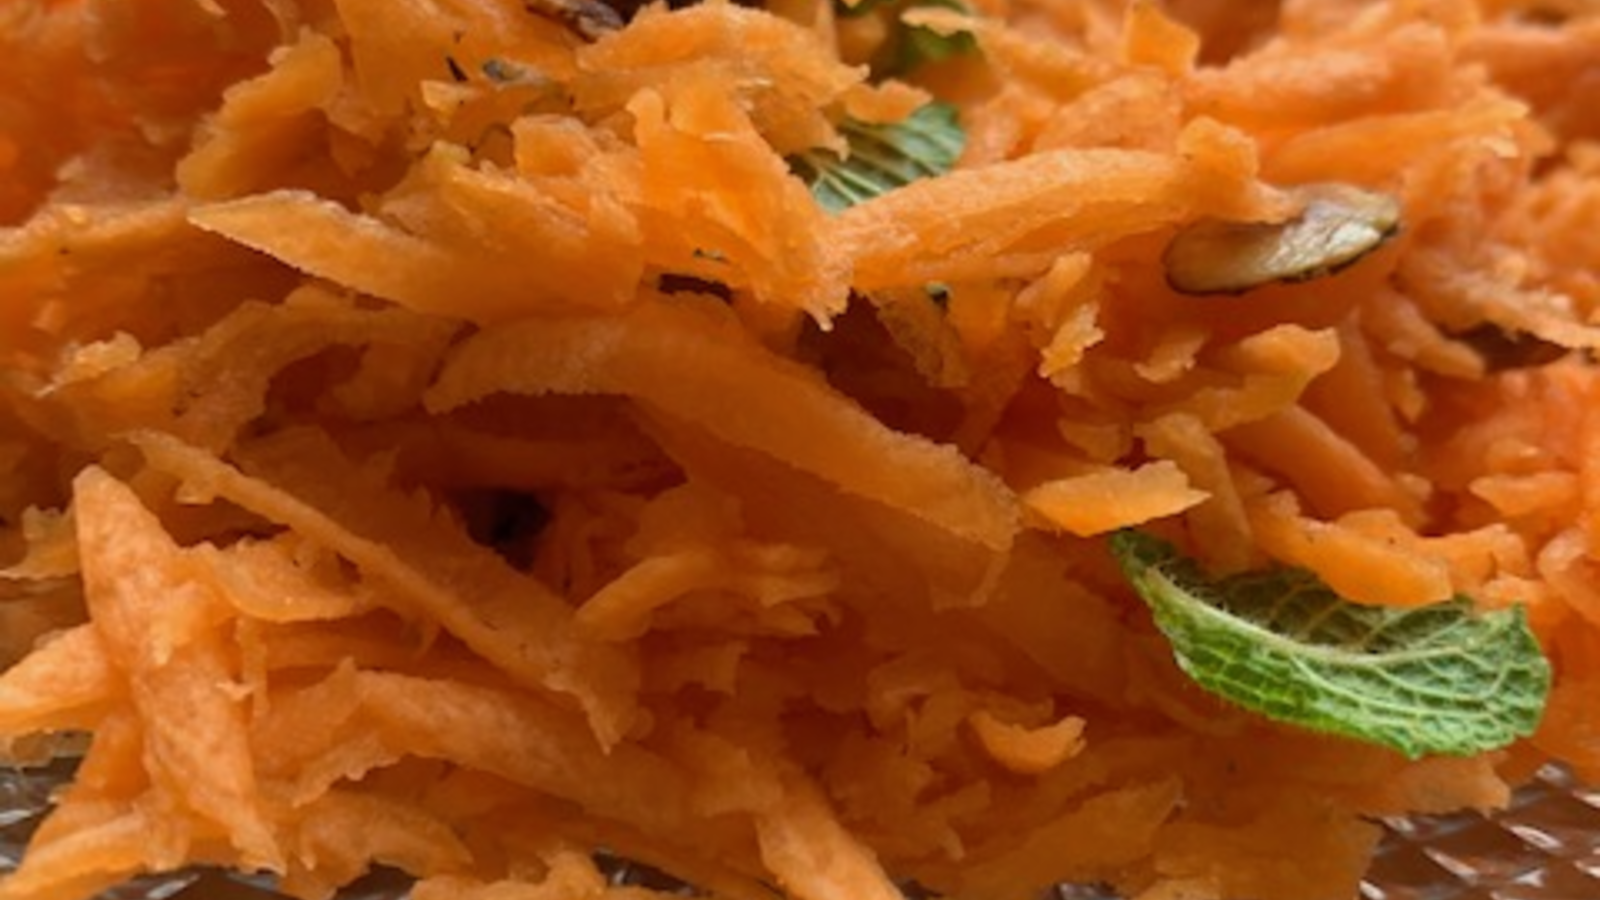 Image of Carrot and nut salad